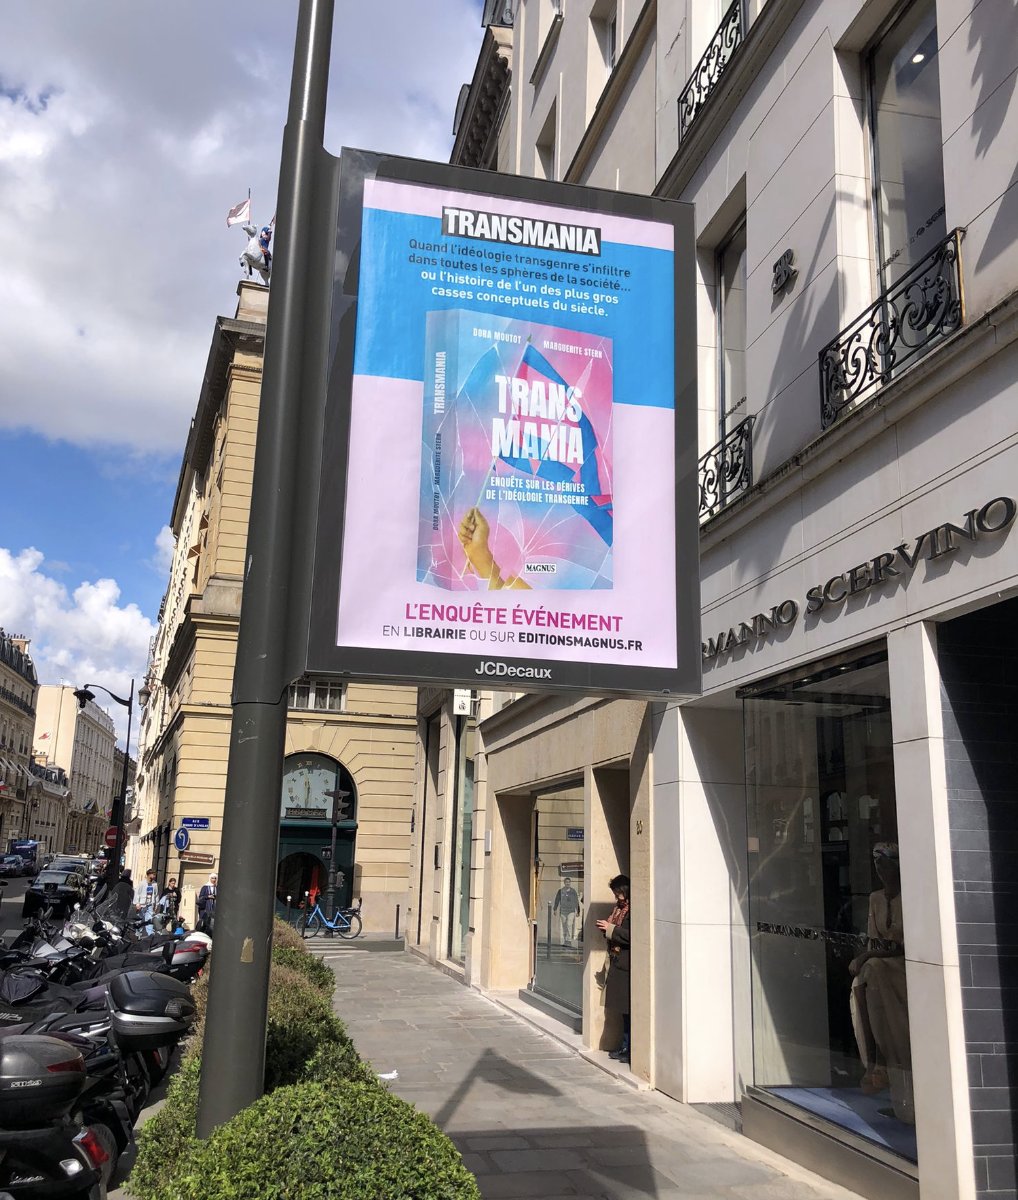 The ads for our book TRANSMANIA will be removed from the streets of Paris by order of the Paris City Hall. I never would have believed I would witness such a regression of public discourse and debate. Freedom of expression in France is dead.